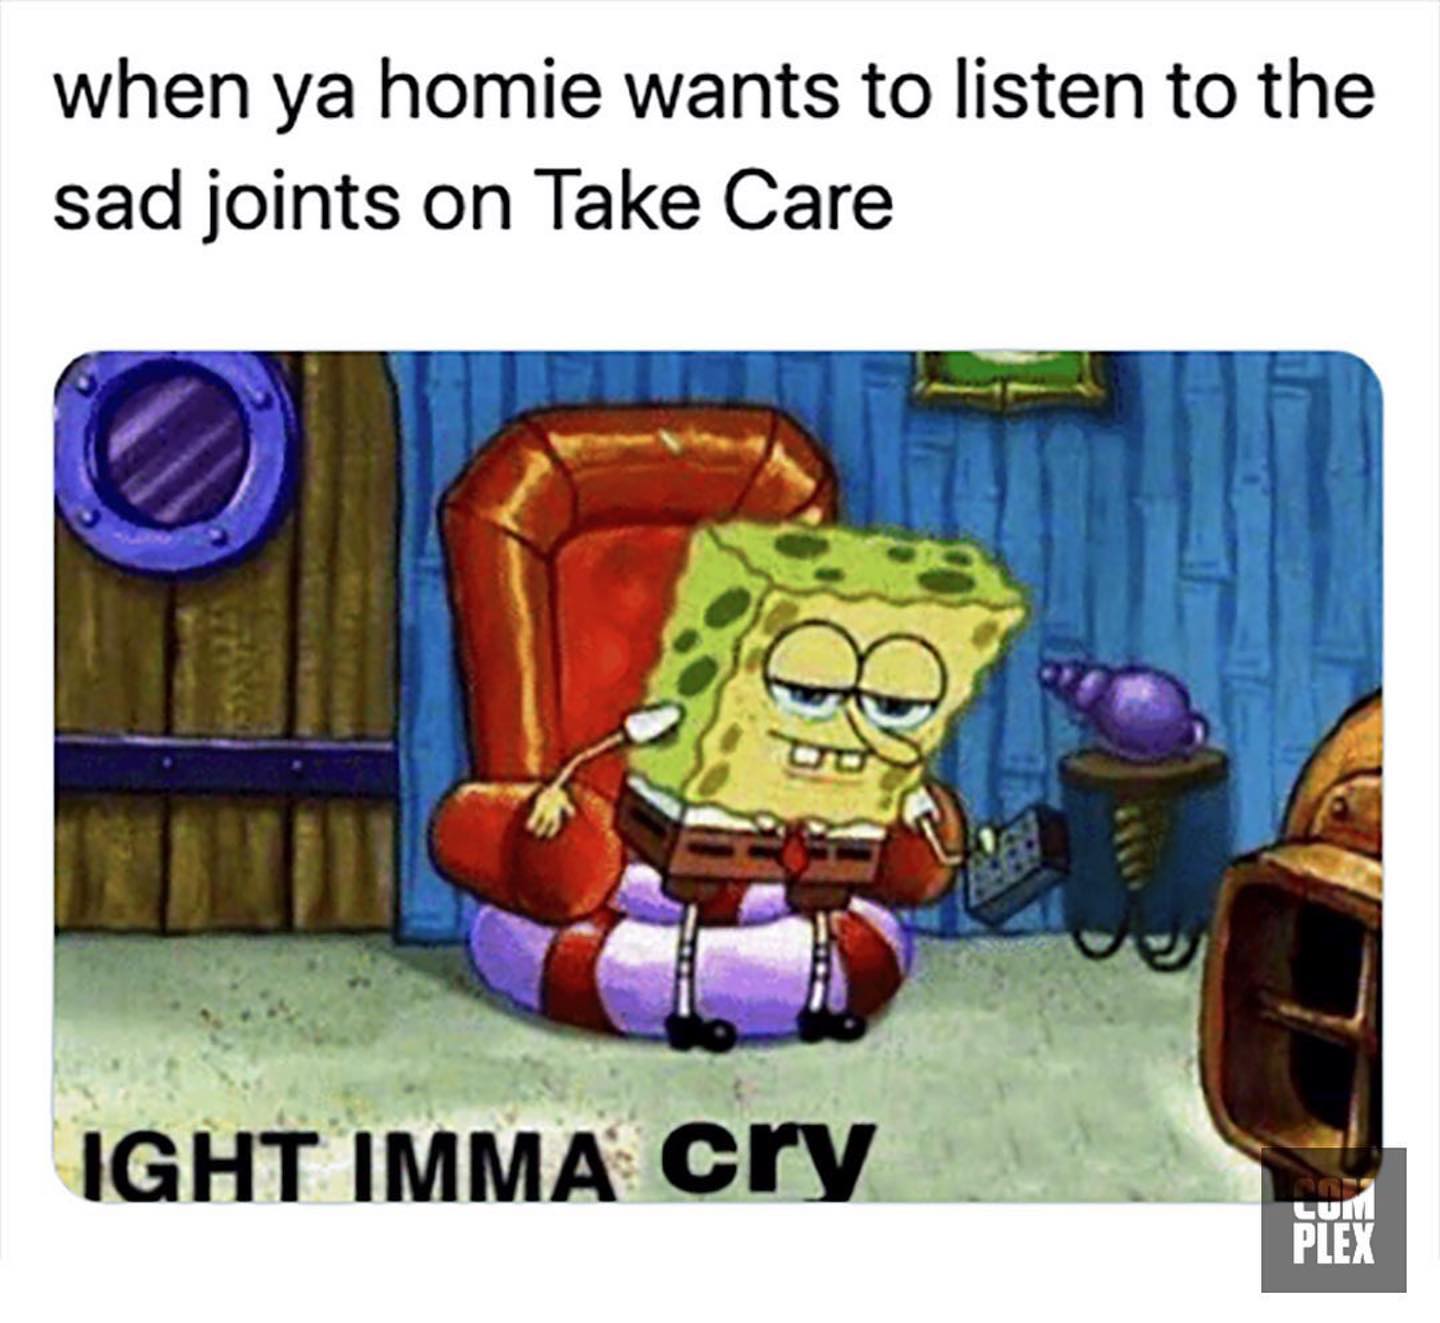 ight ima head out - big igloo meme - when ya homie wants to listen to the sad joints on Take Care he Ight Imma cry Plex